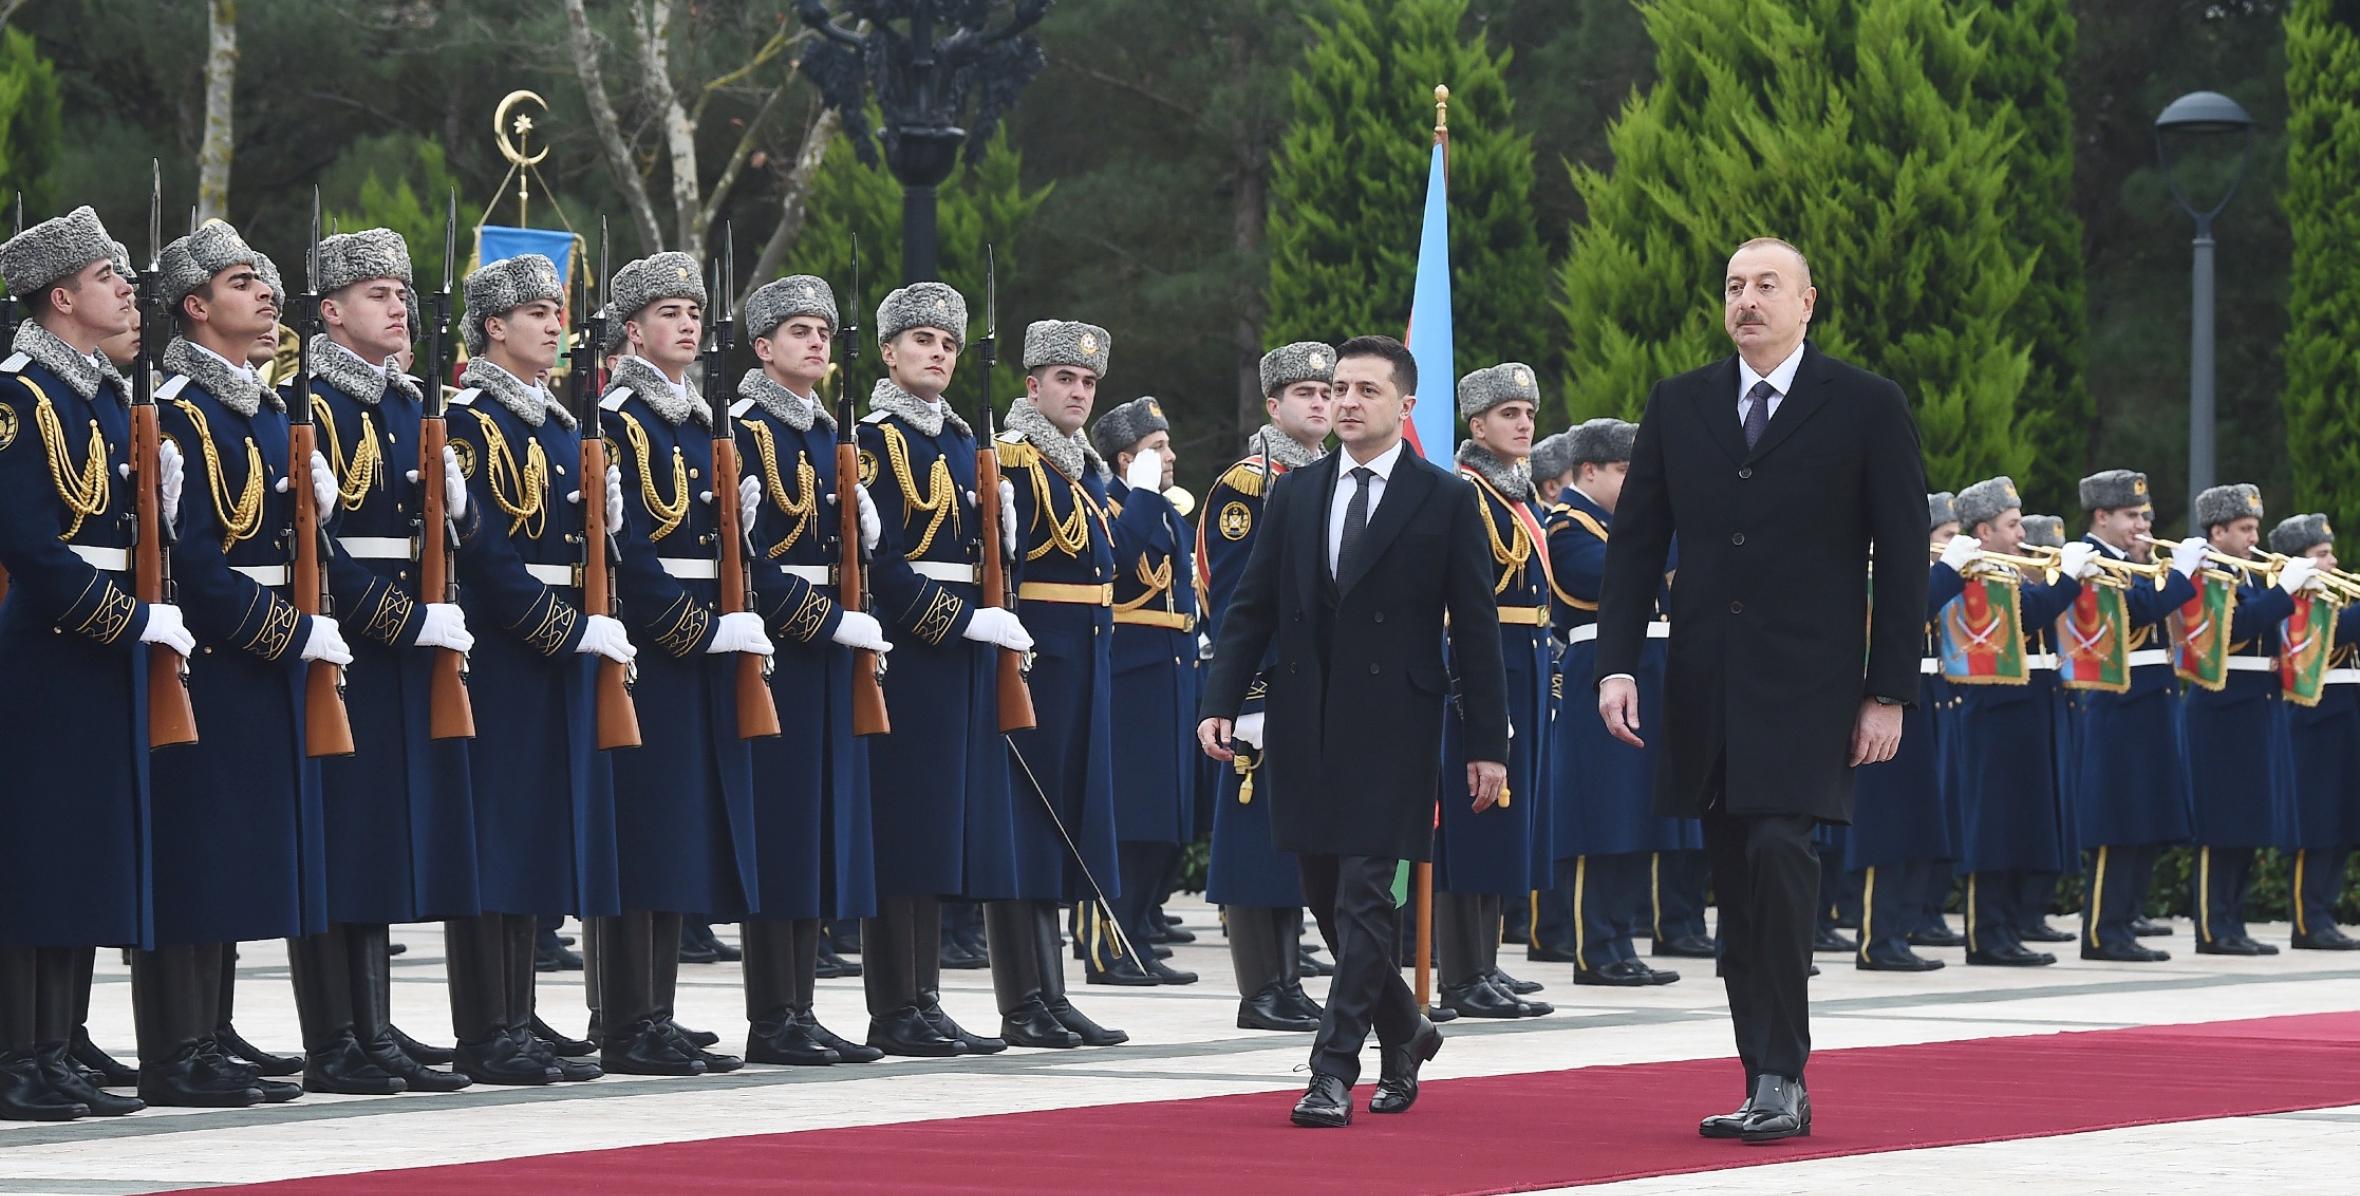 Official welcome ceremony was held for President of Ukraine Volodymyr Zelensky